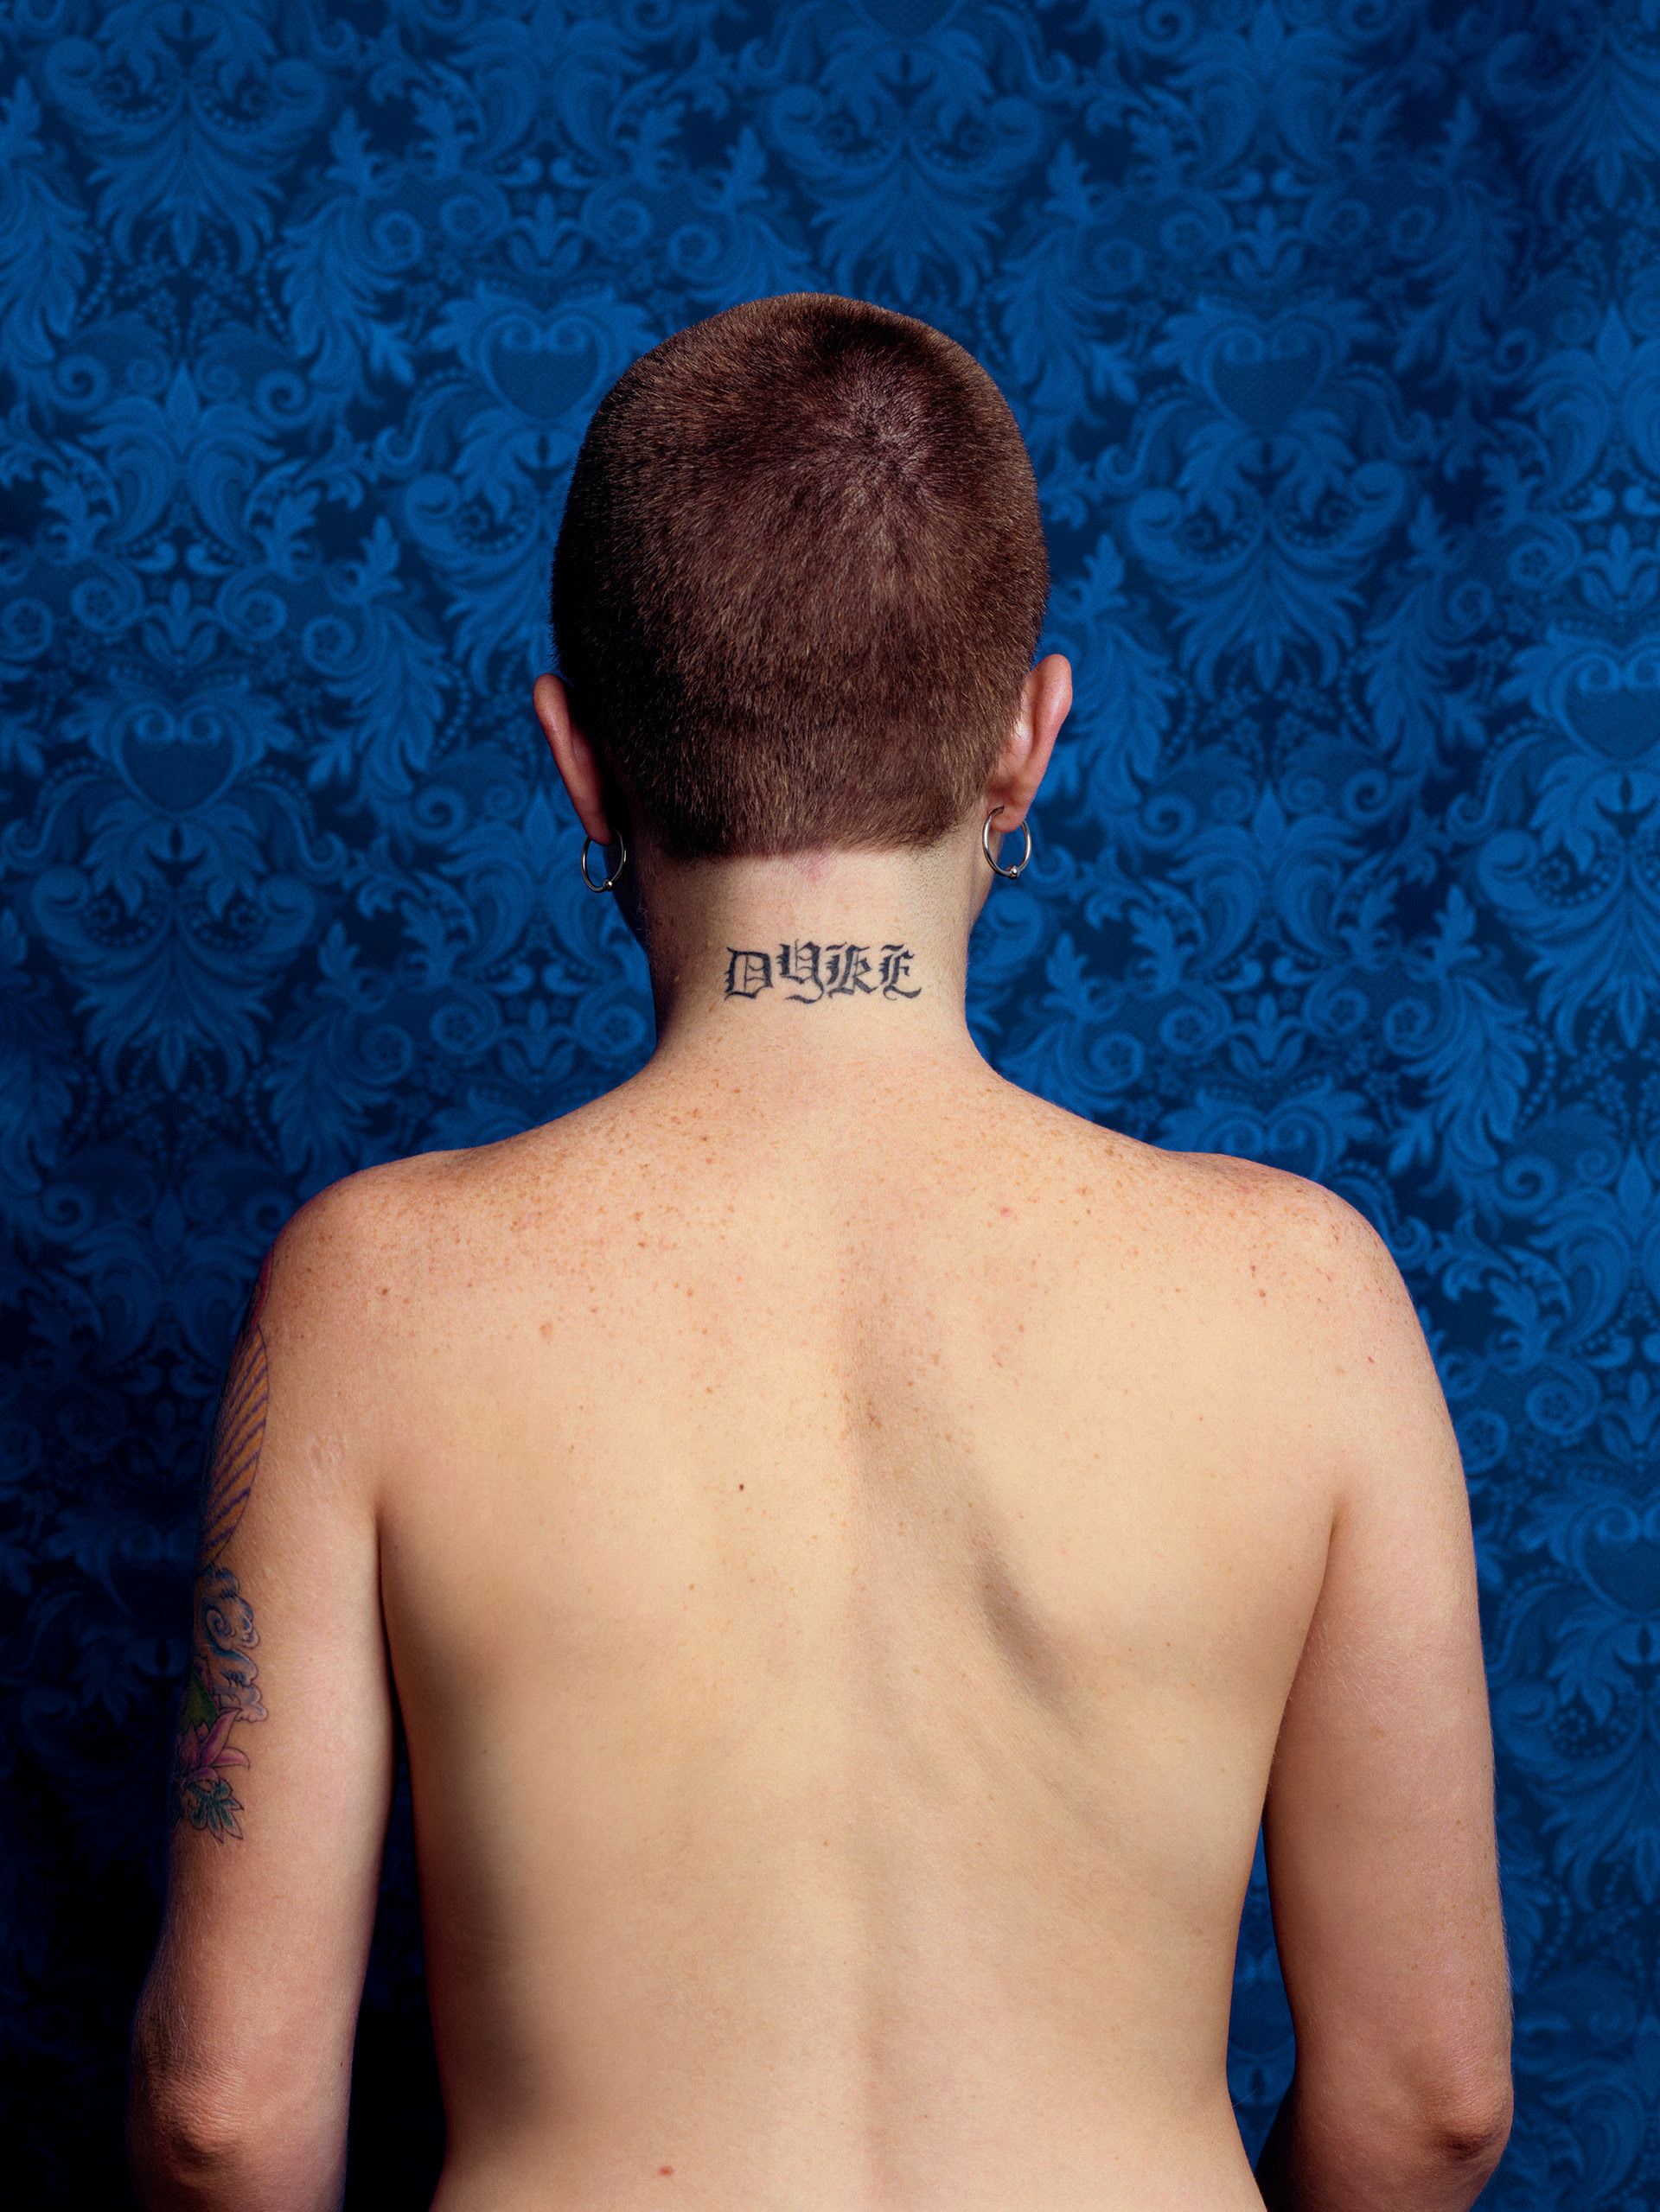 The bare back of a woman with the word dyke tattooed on her neck